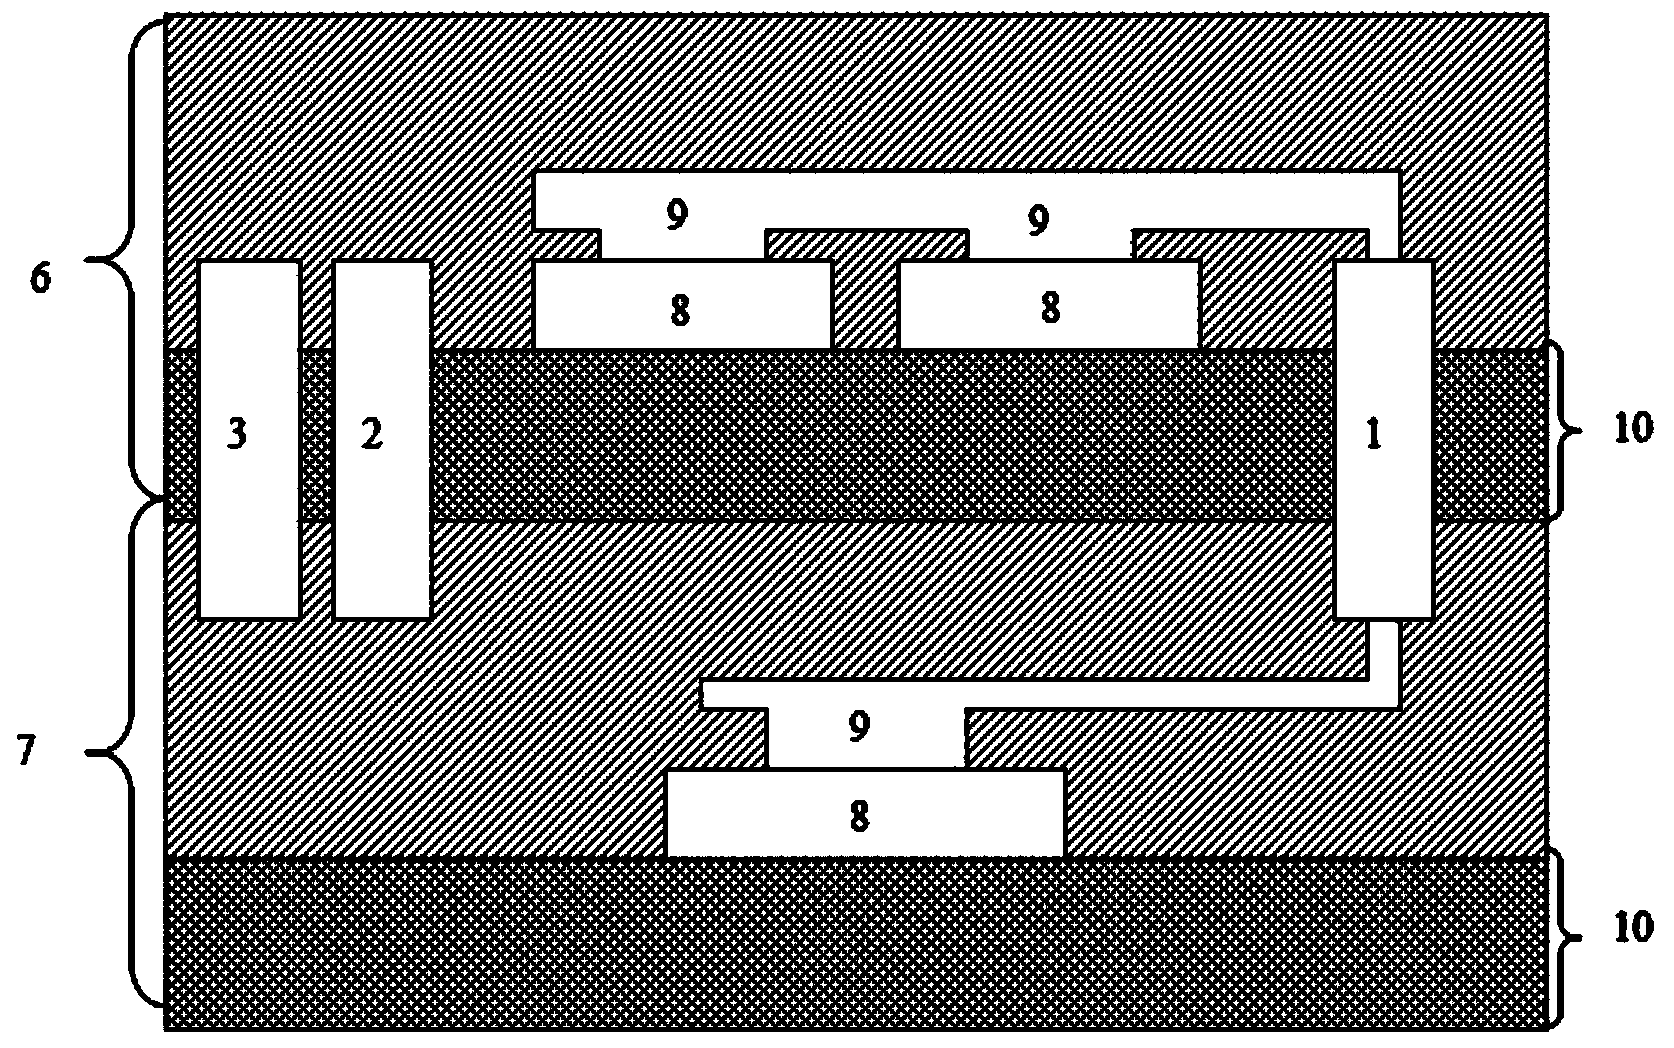 Automatic layout method for positions of heat through holes in 3D integrated circuit